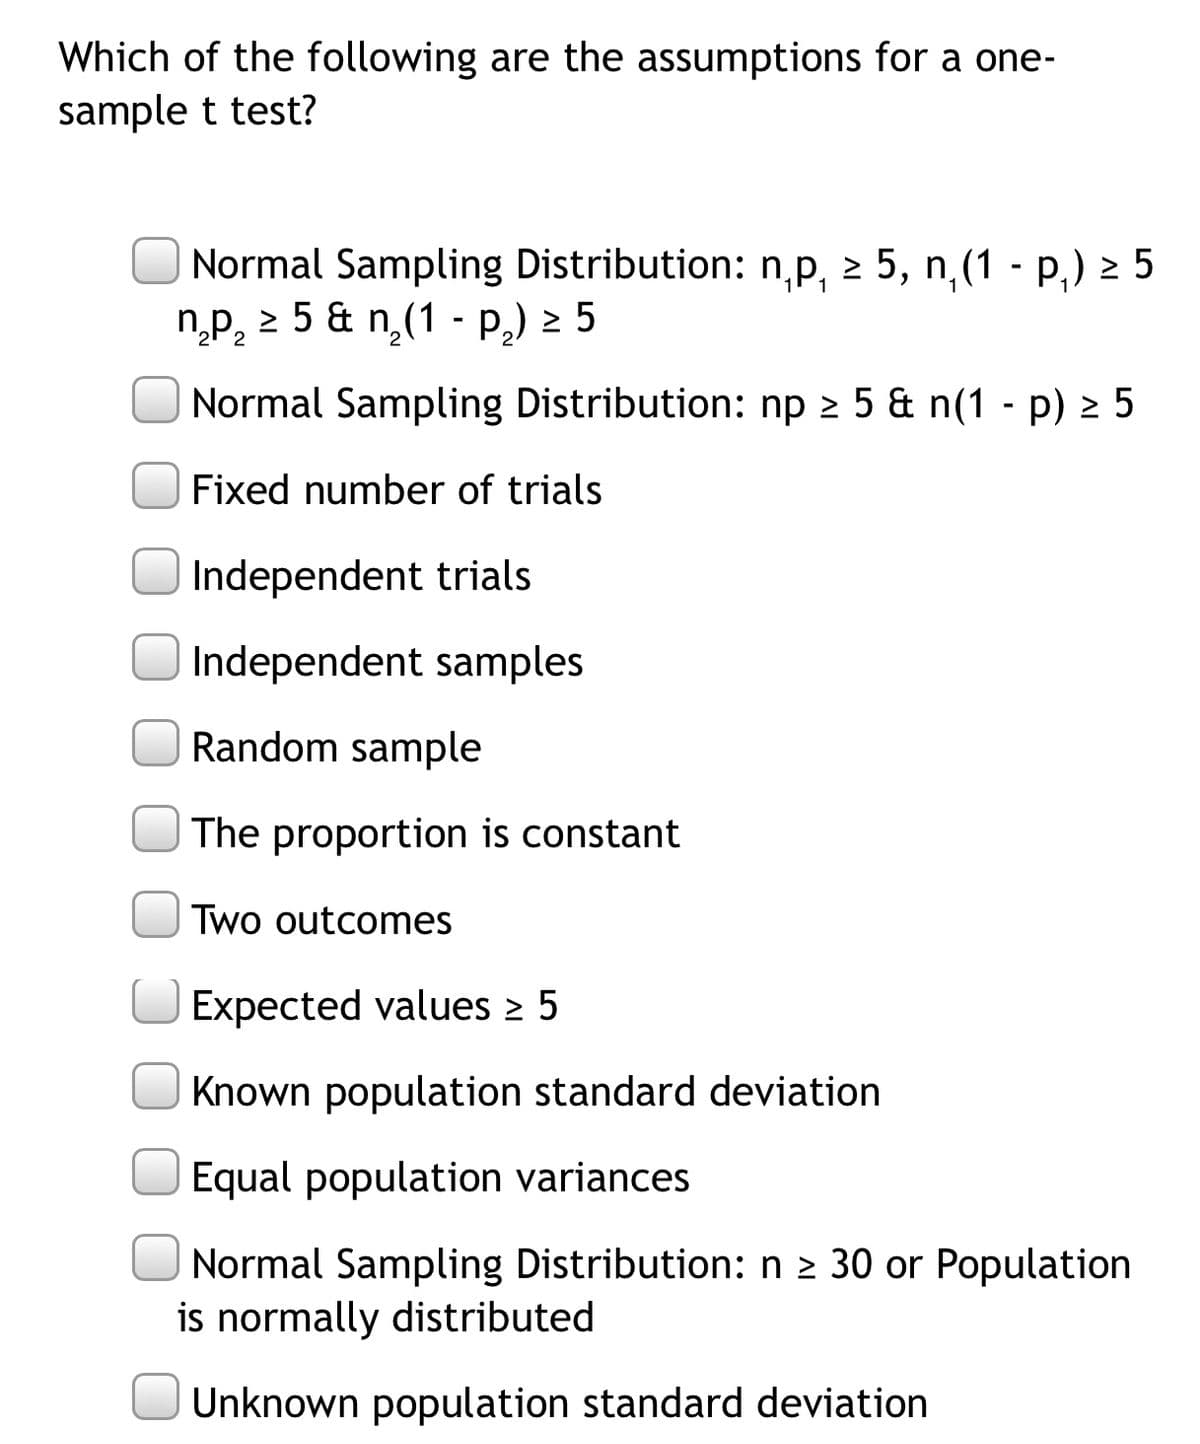 Which of the following are the assumptions for a one-
sample t test?
Normal Sampling Distribution: n,p, 2 5, n,(1 - p,) 2 5
n.p, 2 5 & n,(1 - P,) 2 5
Normal Sampling Distribution: np 2 5 & n(1 - p) 2 5
Fixed number of trials
Independent trials
Independent samples
Random sample
The proportion is constant
Two outcomes
Expected values > 5
Known population standard deviation
Equal population variances
|Normal Sampling Distribution: n 2 30 or Population
is normally distributed
Unknown population standard deviation
